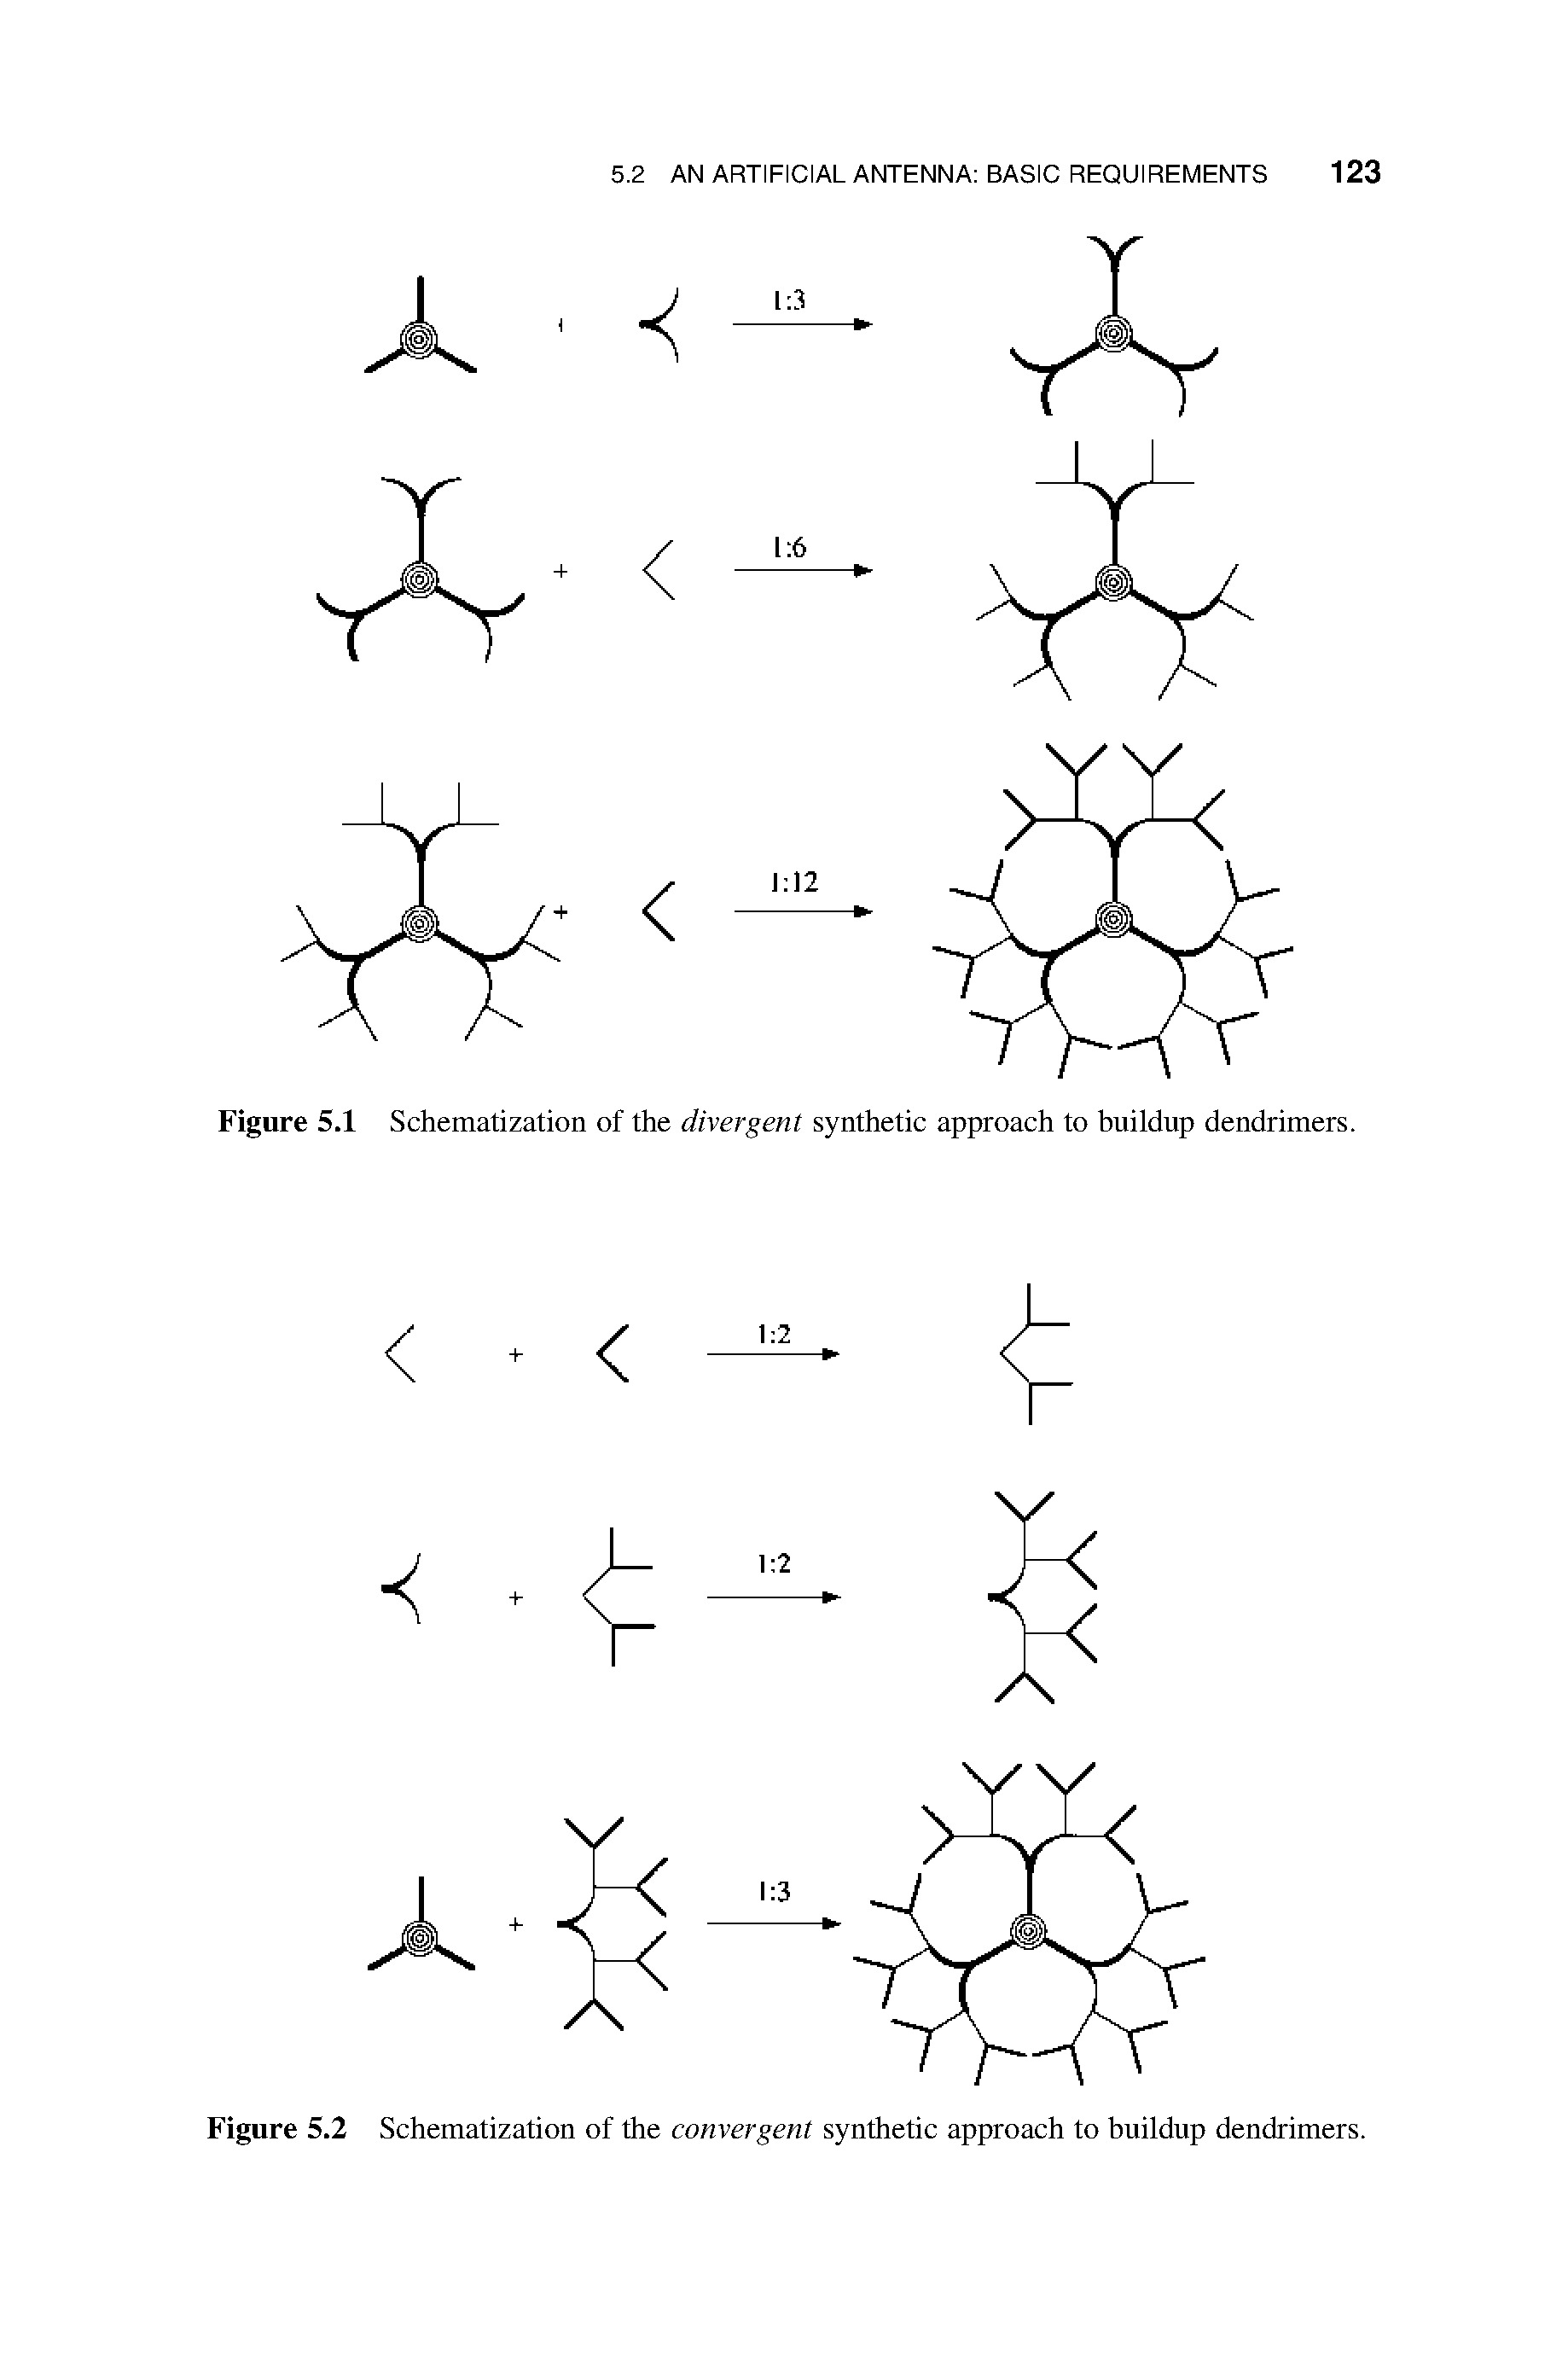 Figure 5.2 Schematization of the convergent synthetic approach to buildup dendrimers.